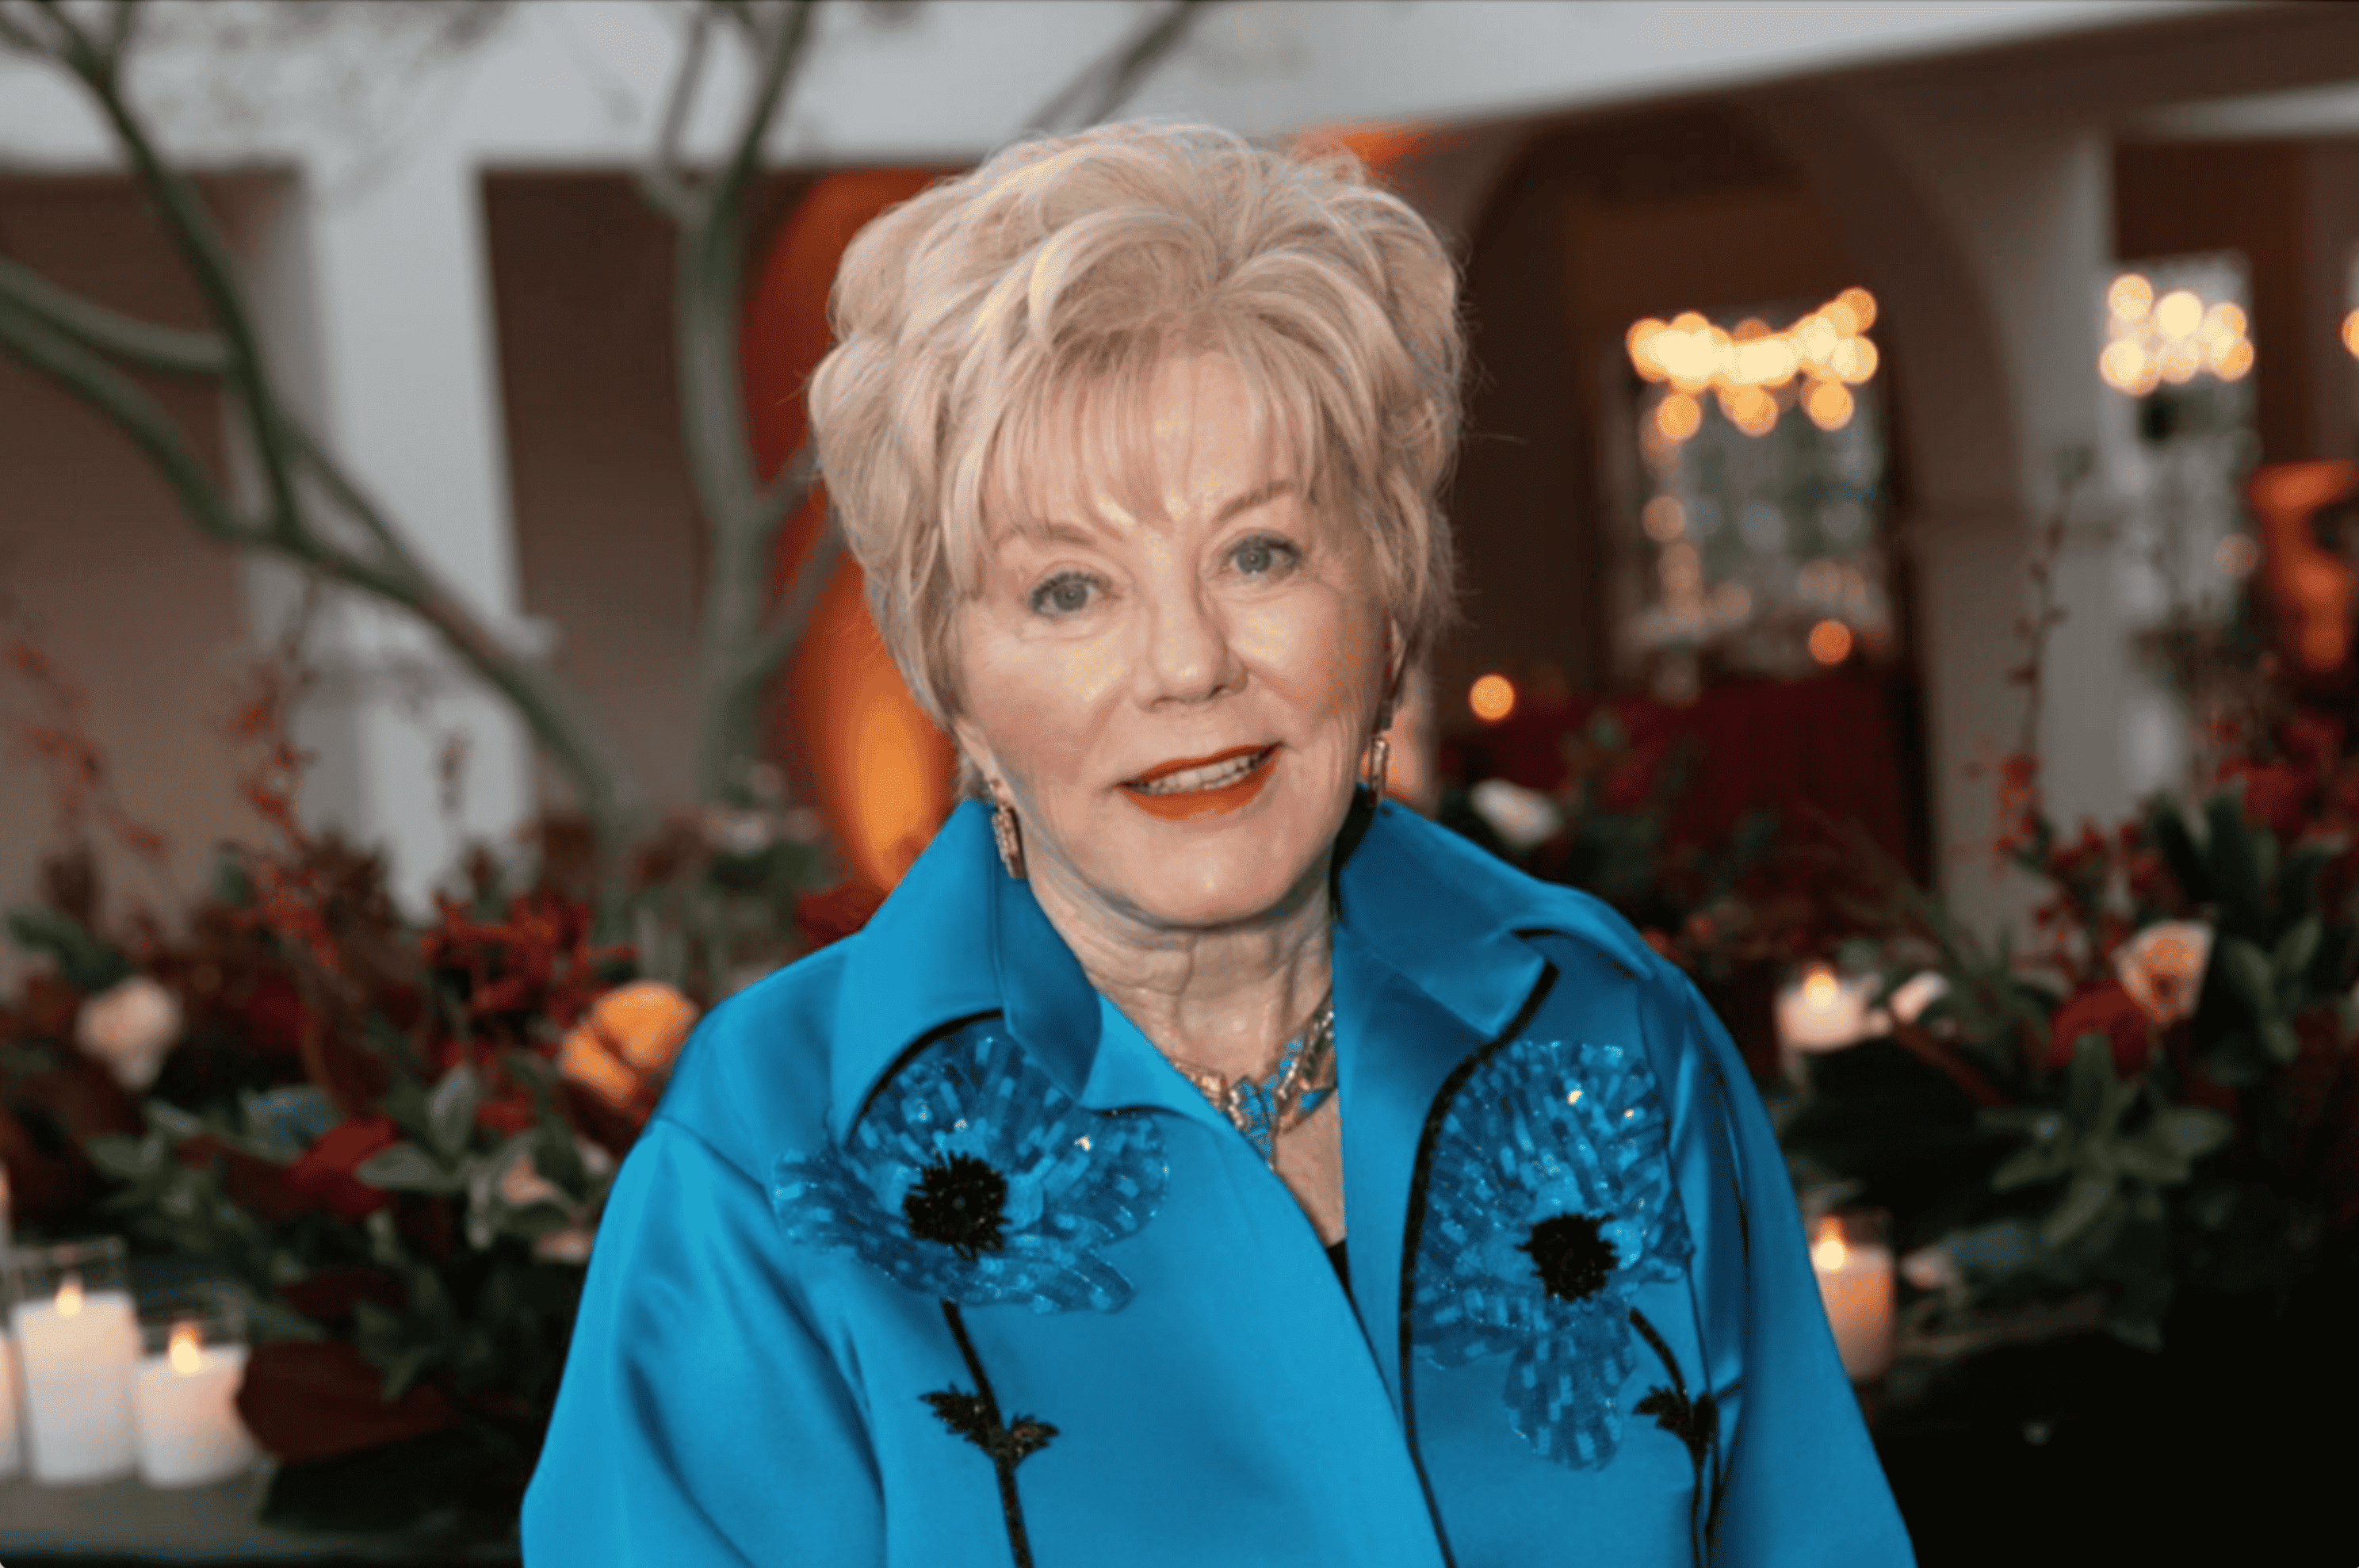 An elegant senior woman with styled blonde hair, wearing a bright blue blouse with moondance floral detailing, smiling at a formal event.